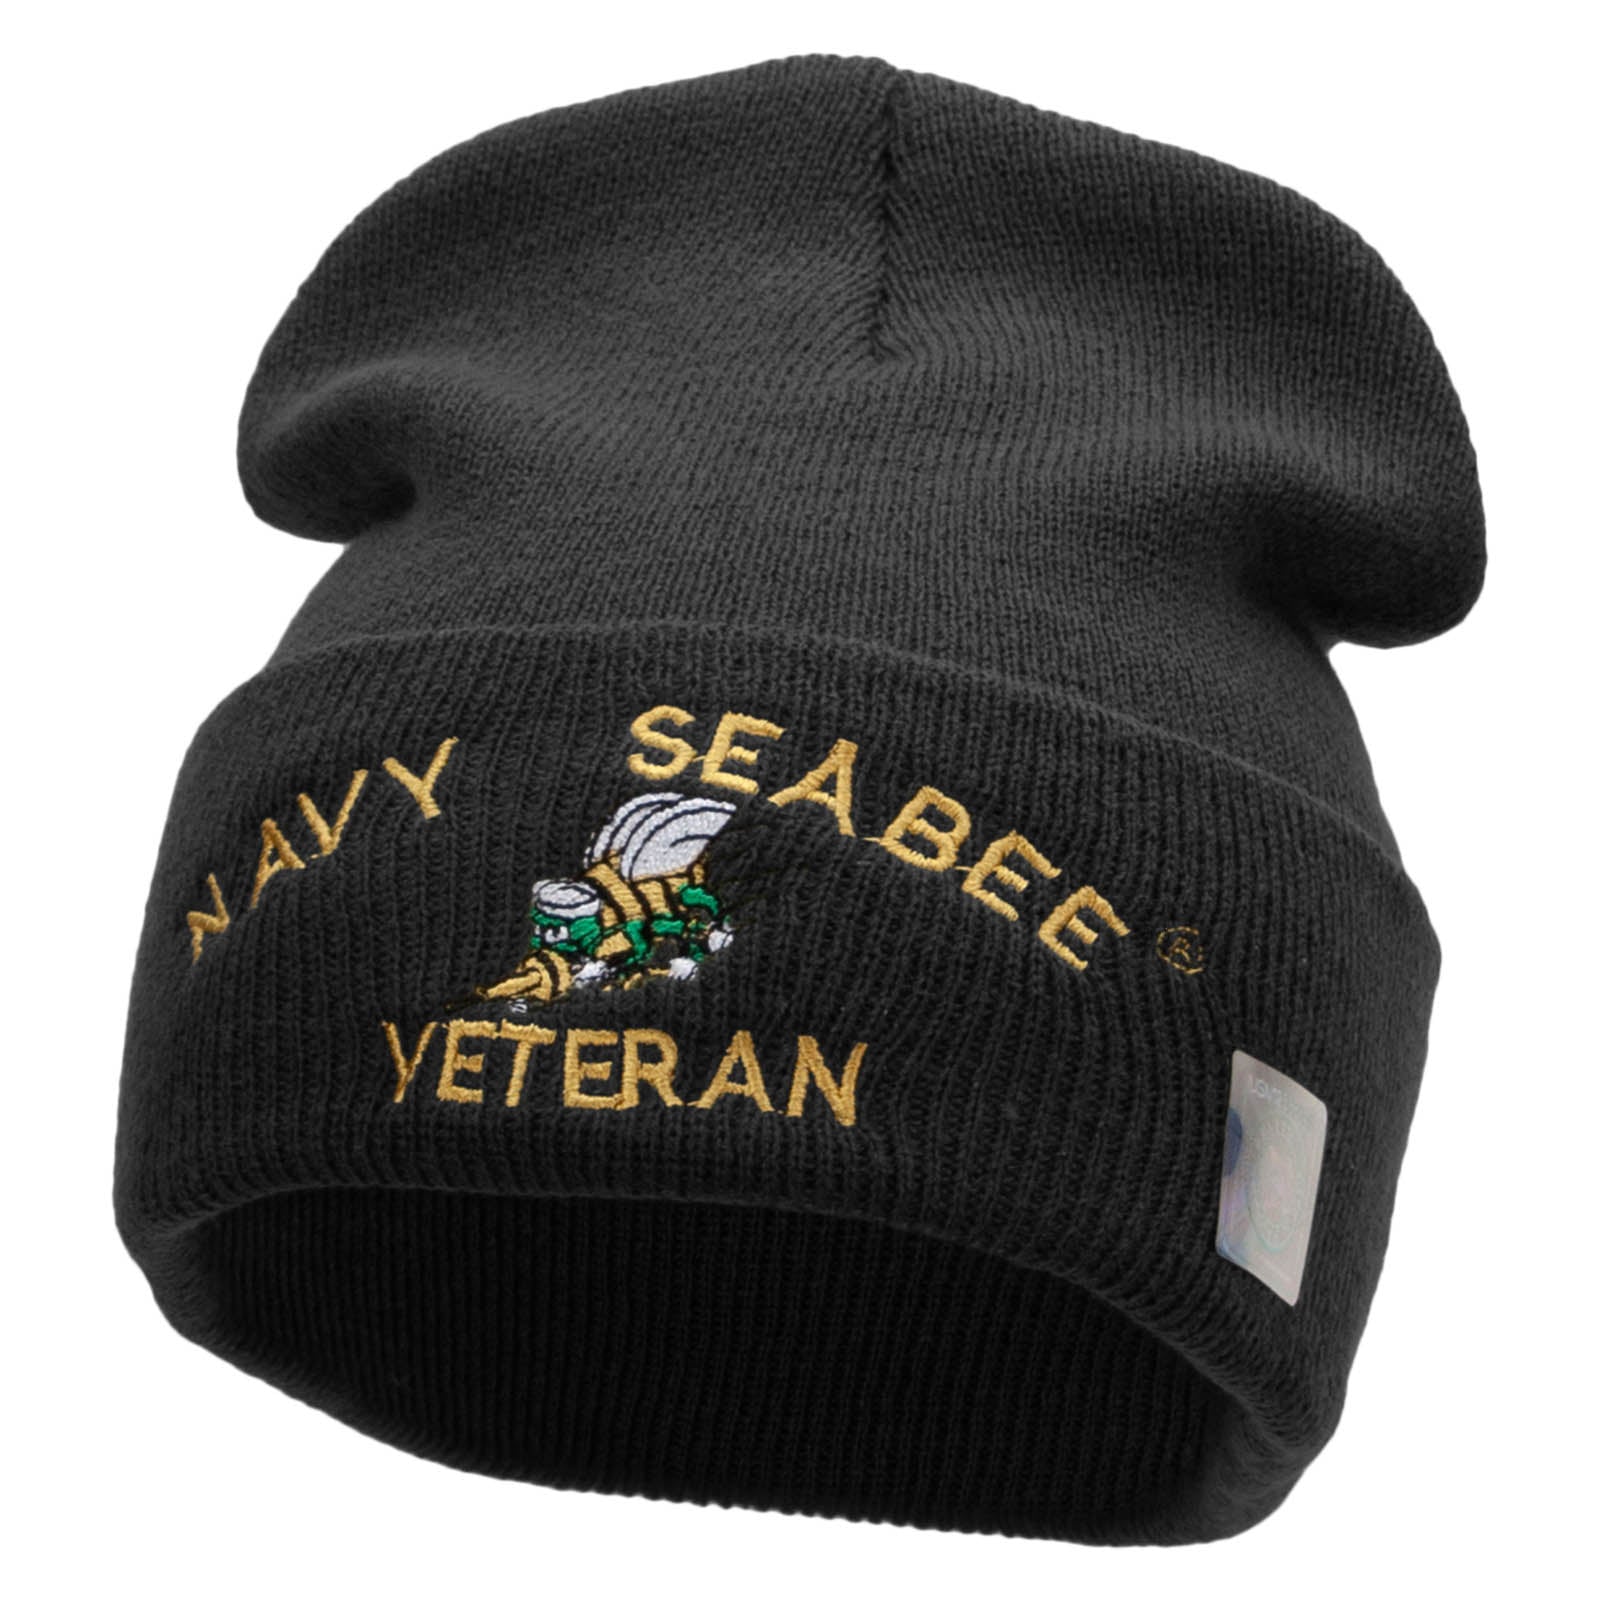 Licensed US Navy Seabee Veteran Military Embroidered Long Beanie Made in USA - Black OSFM